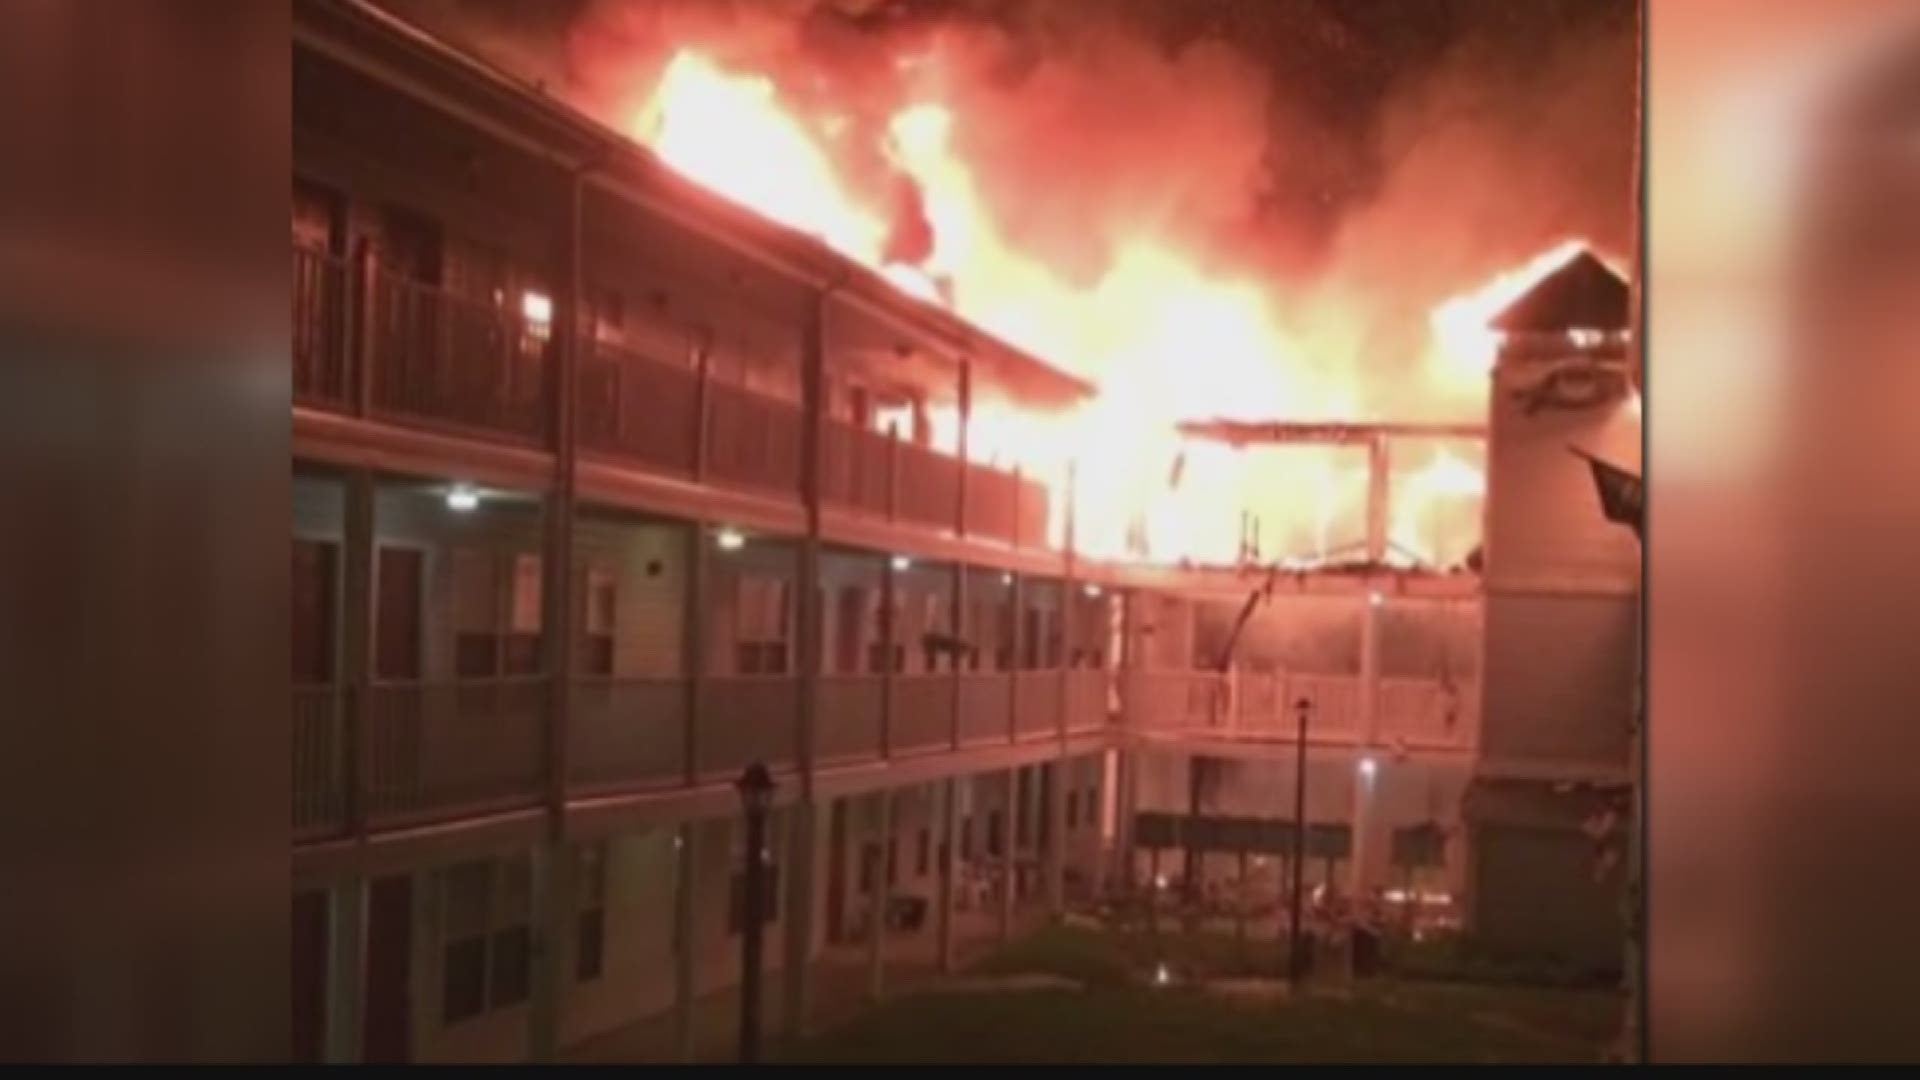 We are taking a deeper look into the history of the Chesapeake Crossing Apartments, where a large fire left three dead, several injured and more than one hundred people displaced. 13News Now checked with the fire department to see if the buildings had any